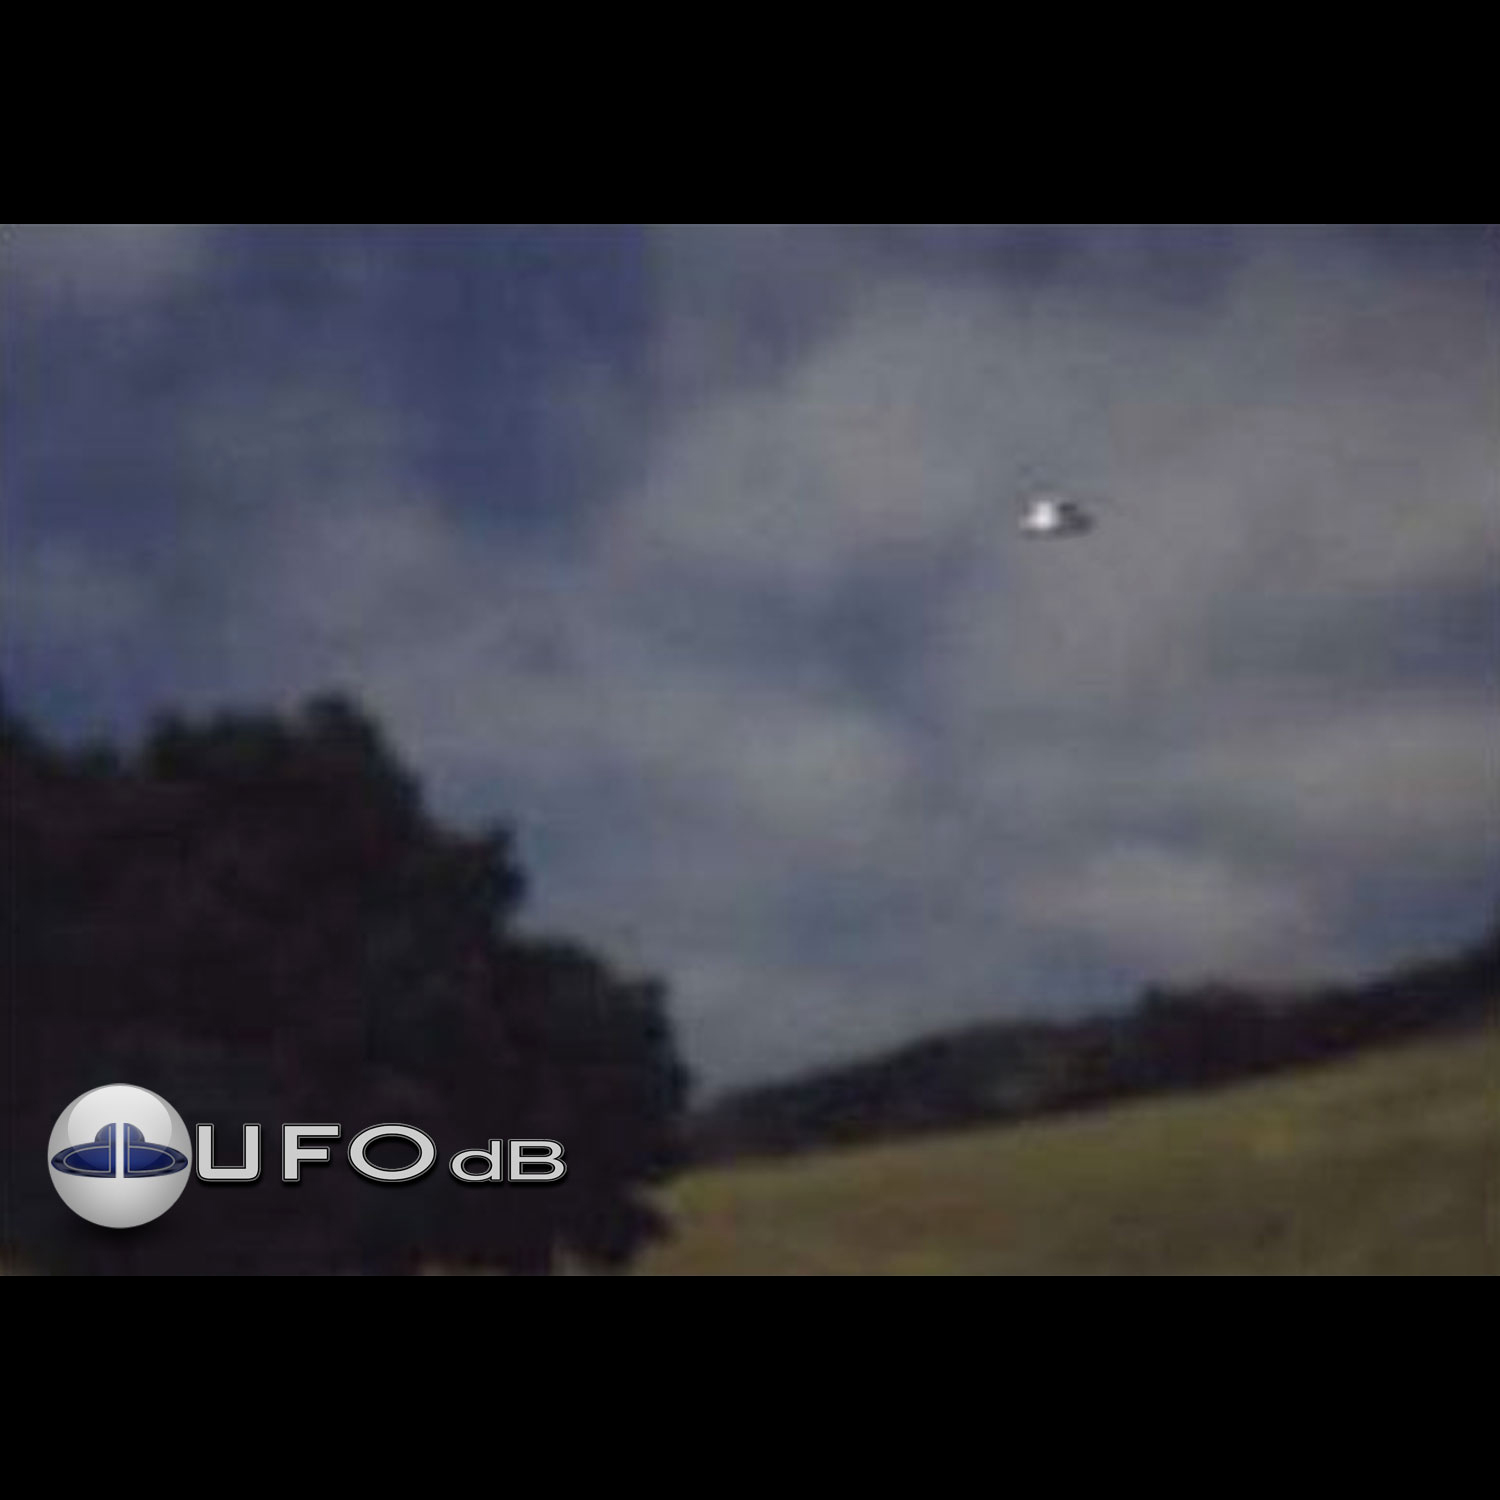 UFO over the country in Scotland during the day in a blue sky UFO Picture #15-1